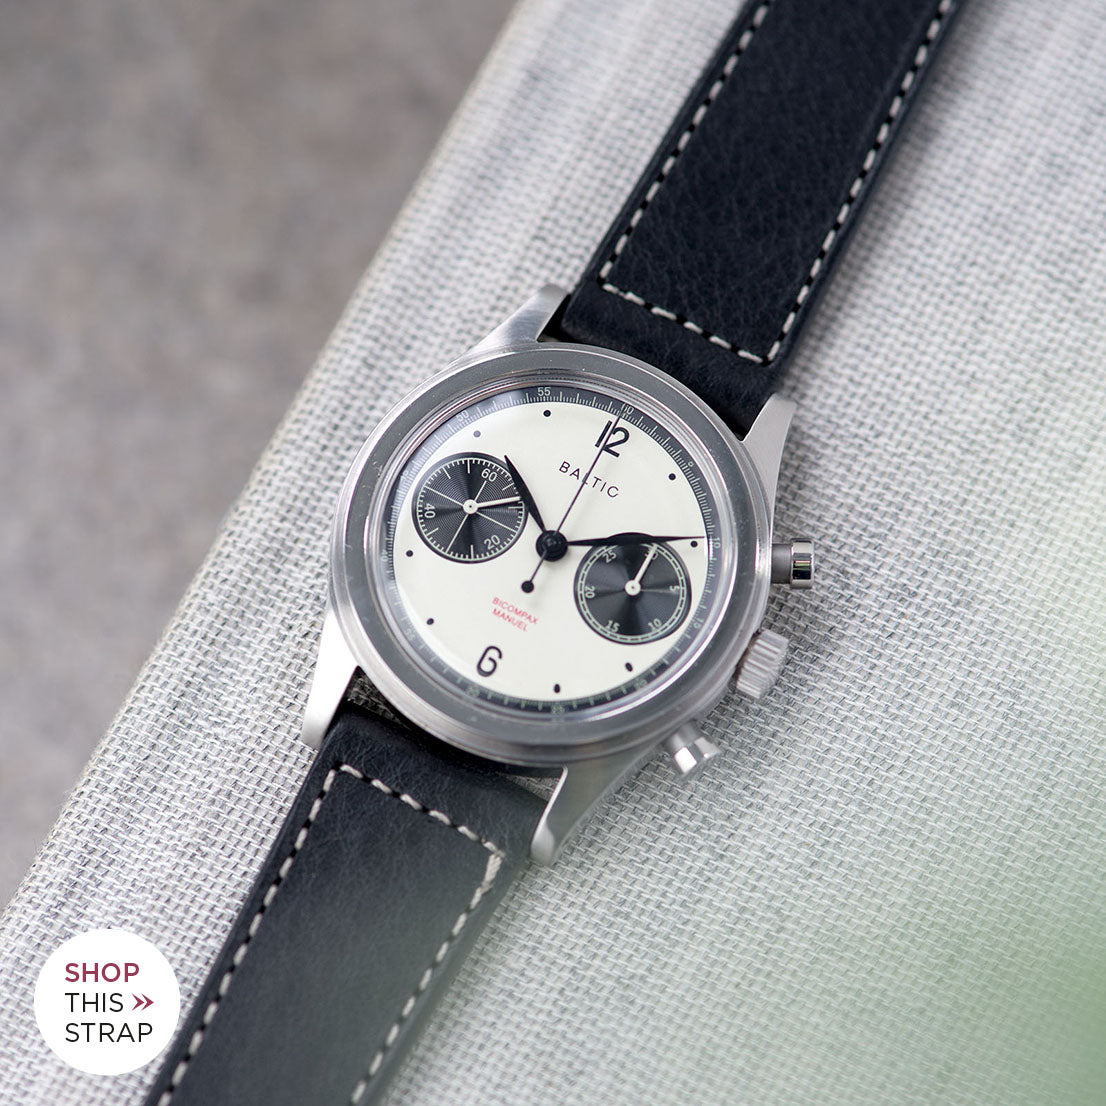 Bulang and Sons_Strap Guide_The Baltic-Chronograph-Panda-Limited-Edition_Black Boxed Stitch Leather Watch Strap